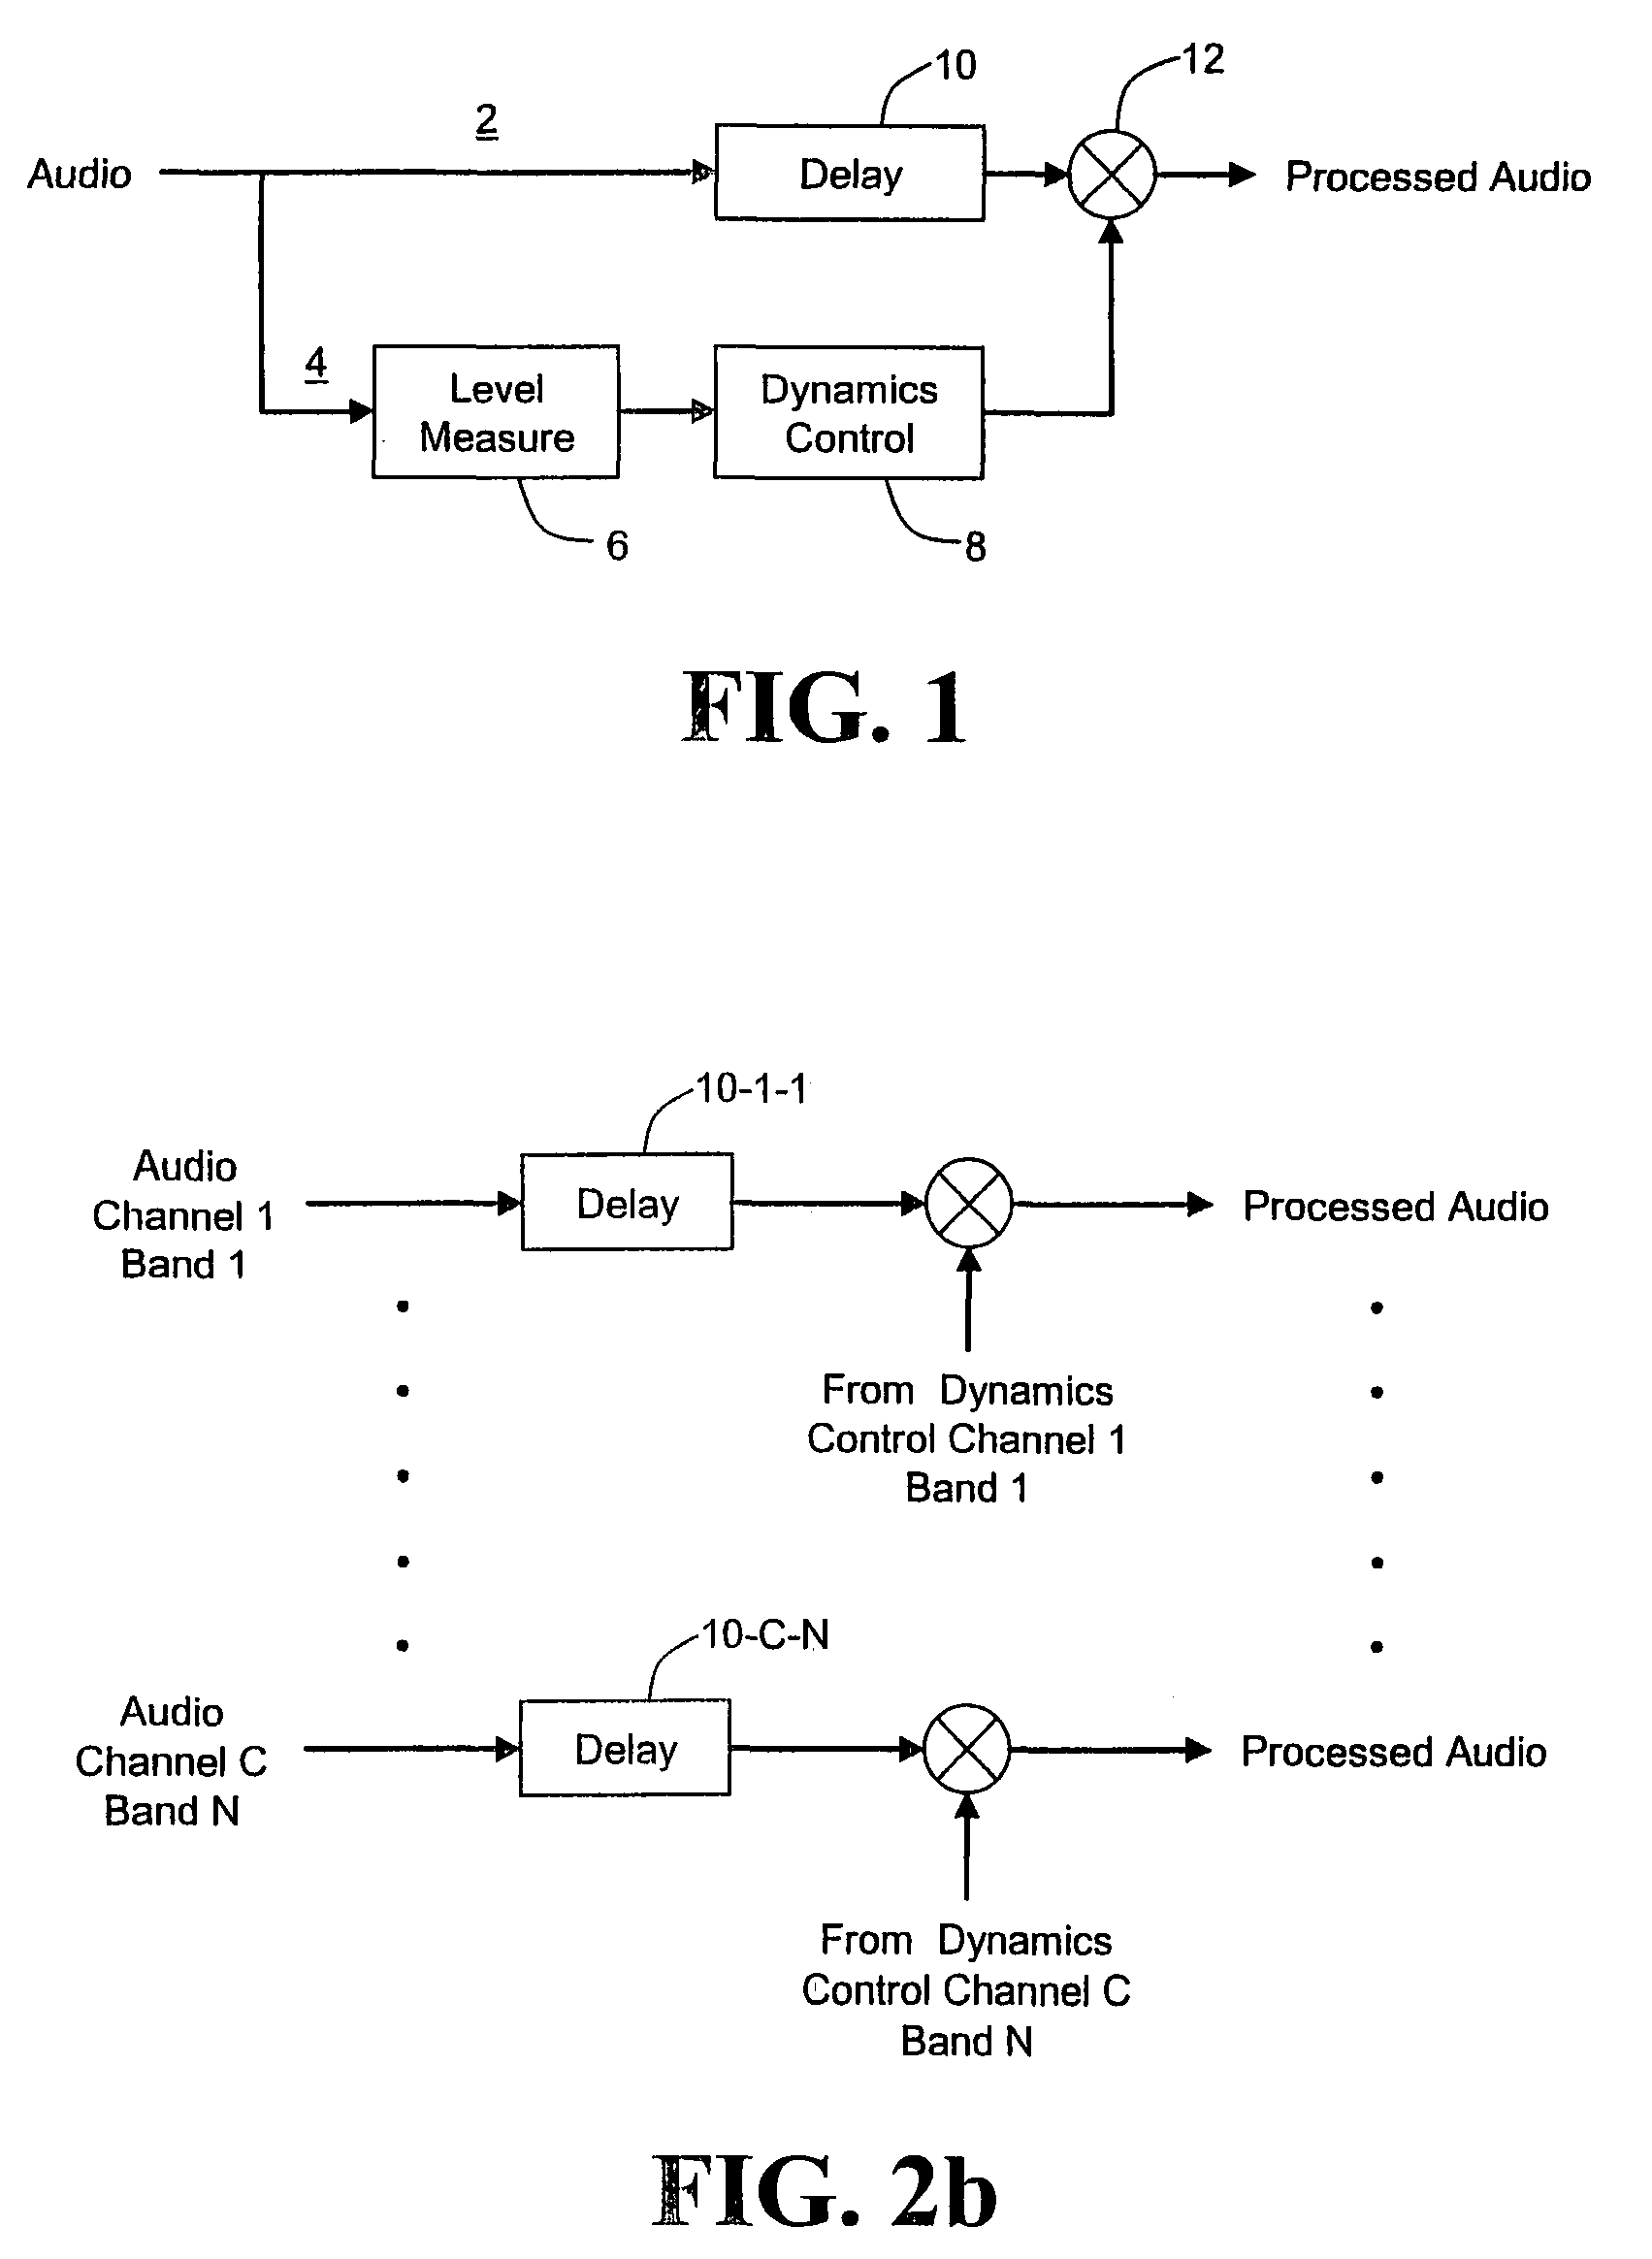 Hierarchical control path with constraints for audio dynamics processing